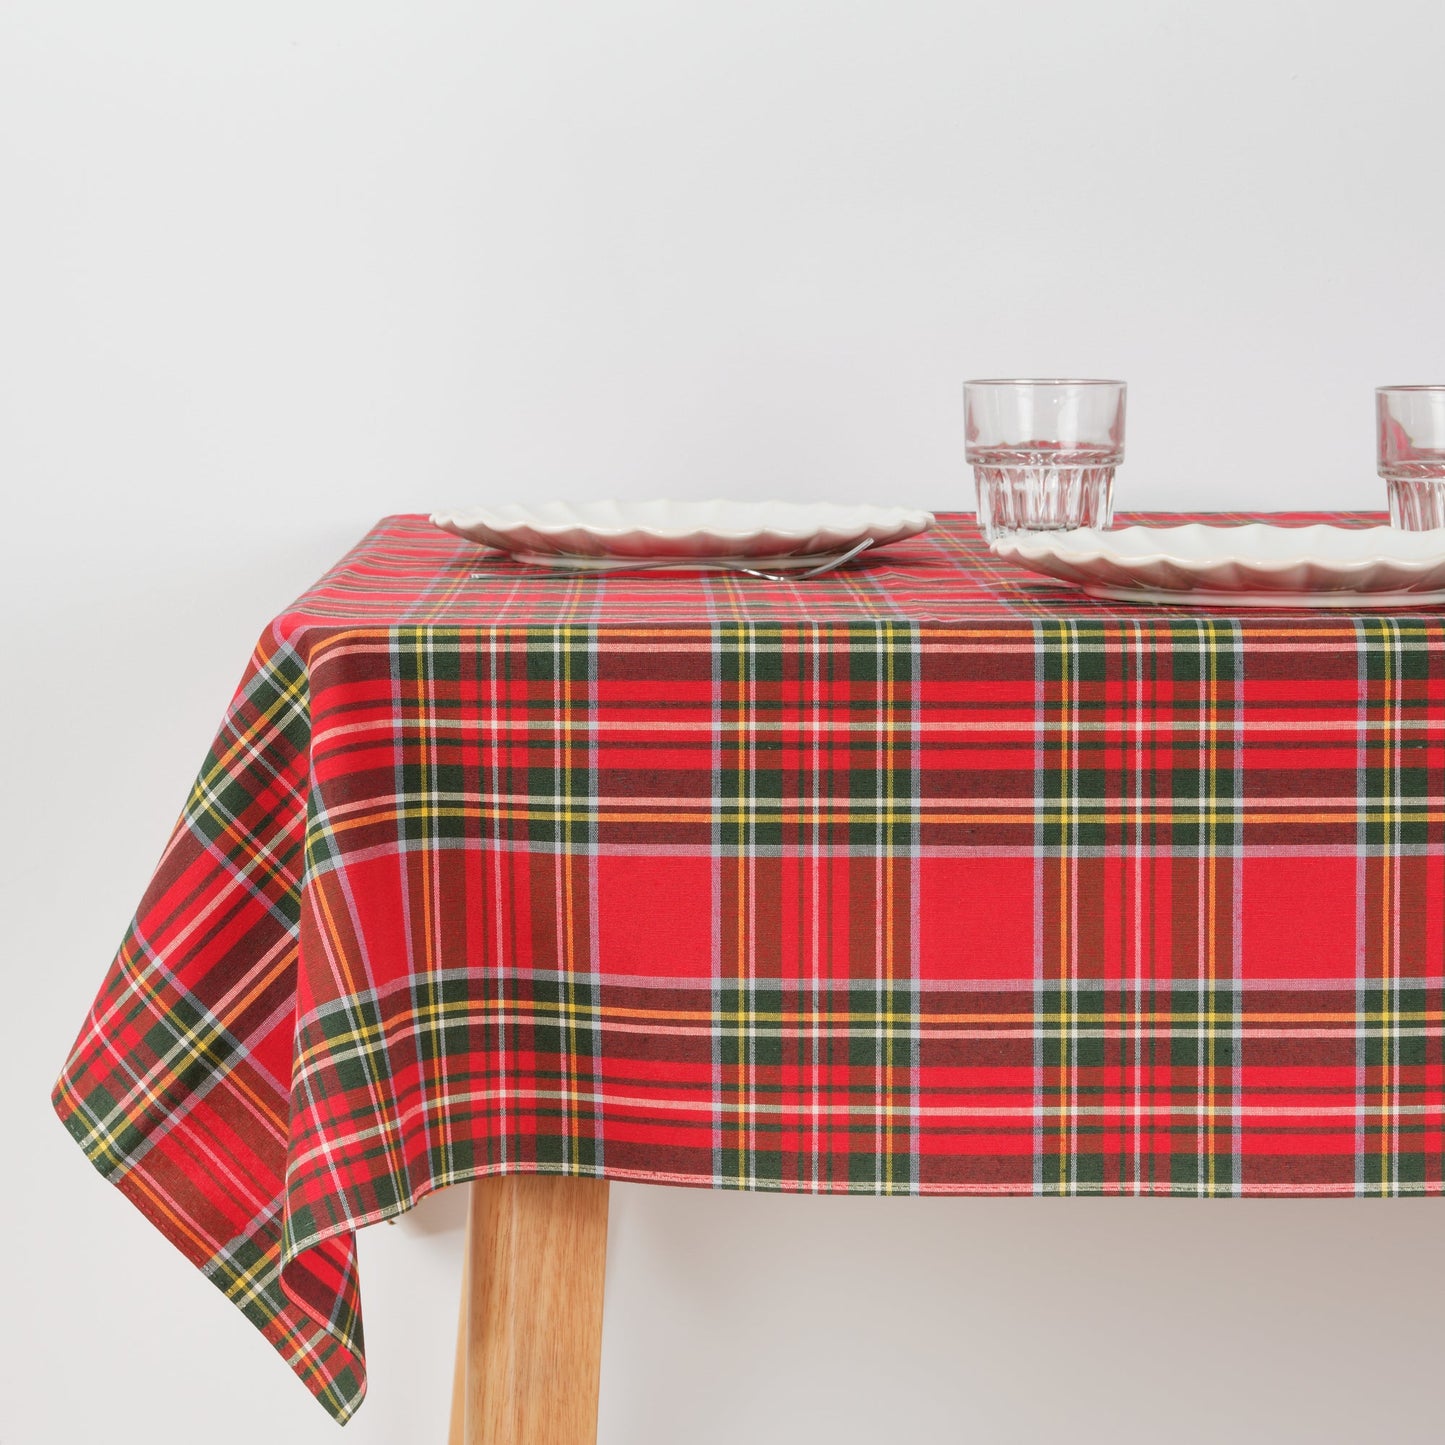 Cabal fabric touch tablecloth 01